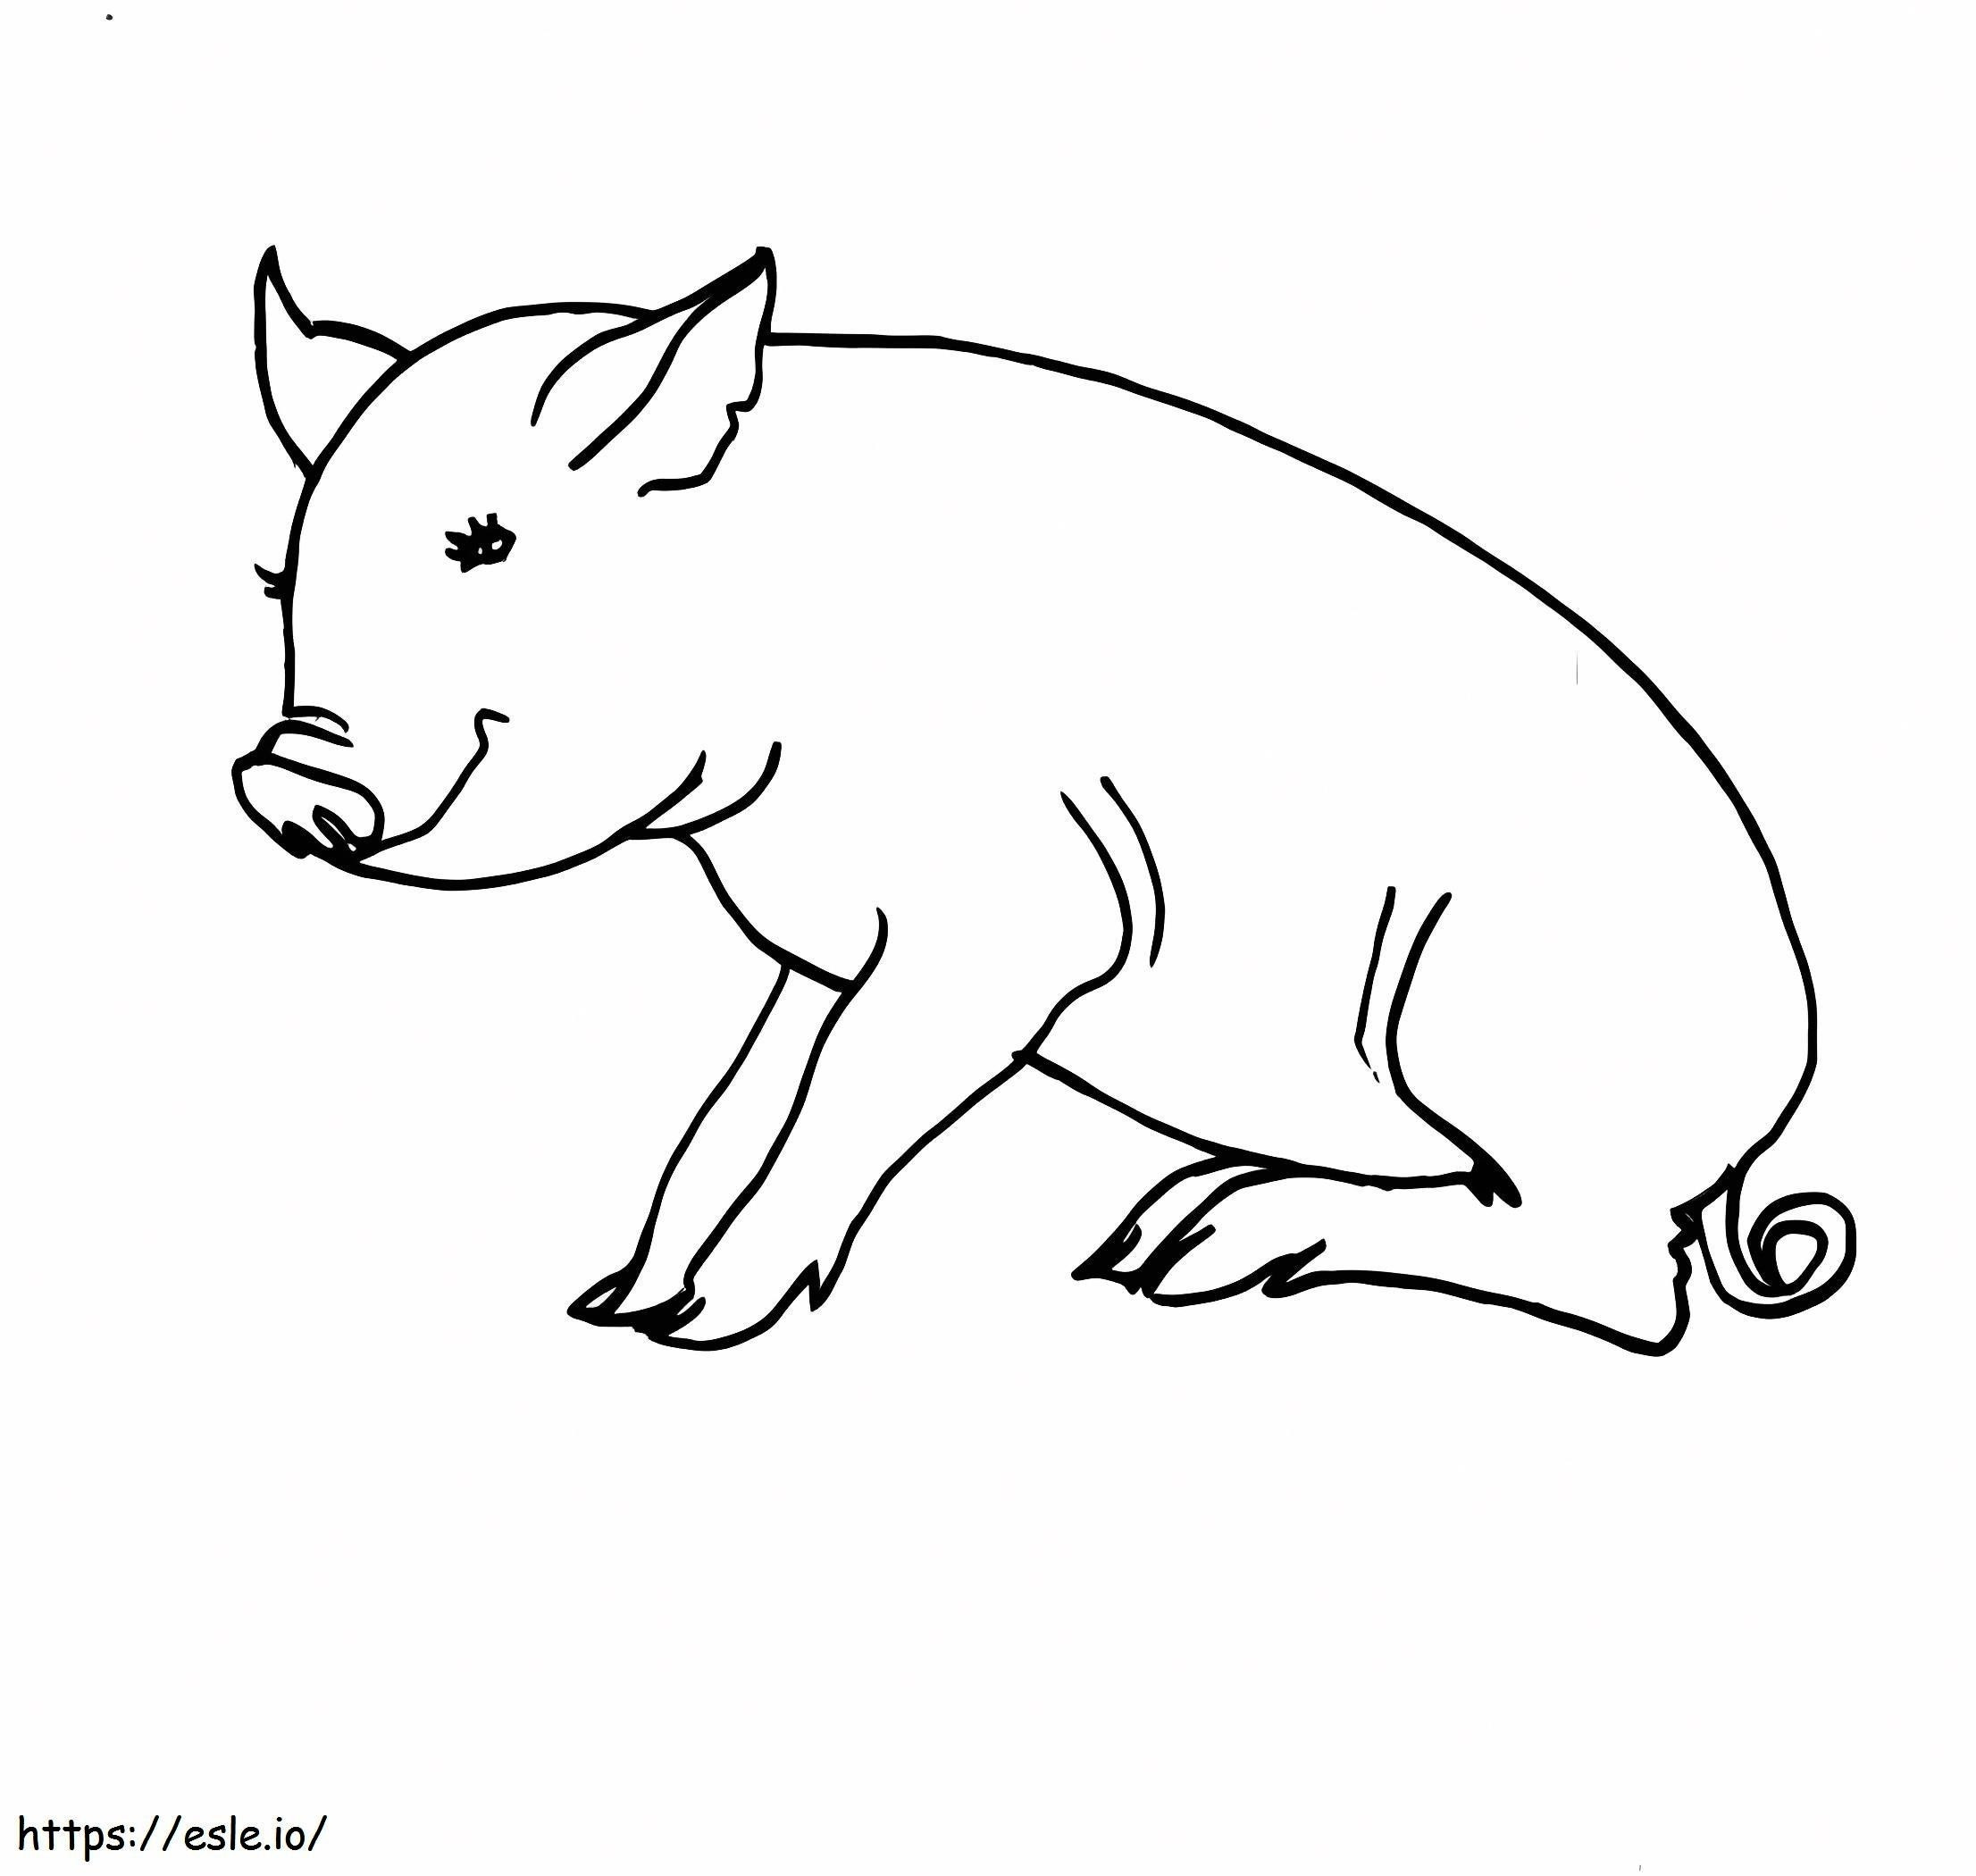 Pig Is Sitting coloring page